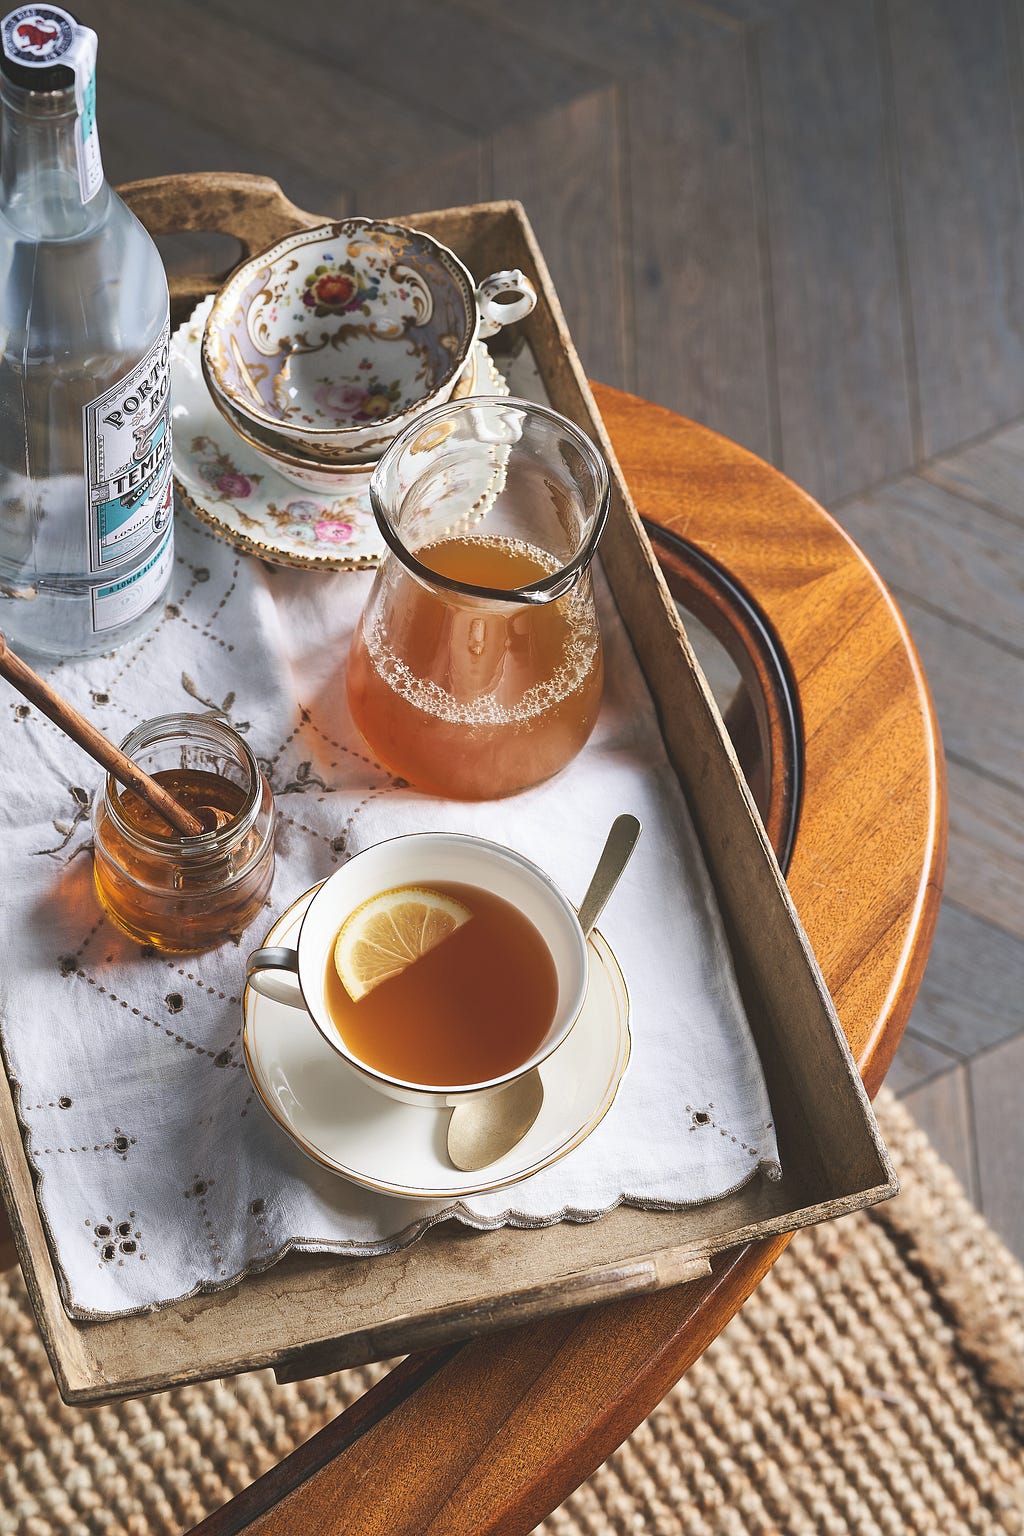 a tea tray with a teacup with a drink inside and a pot of honey on the tray